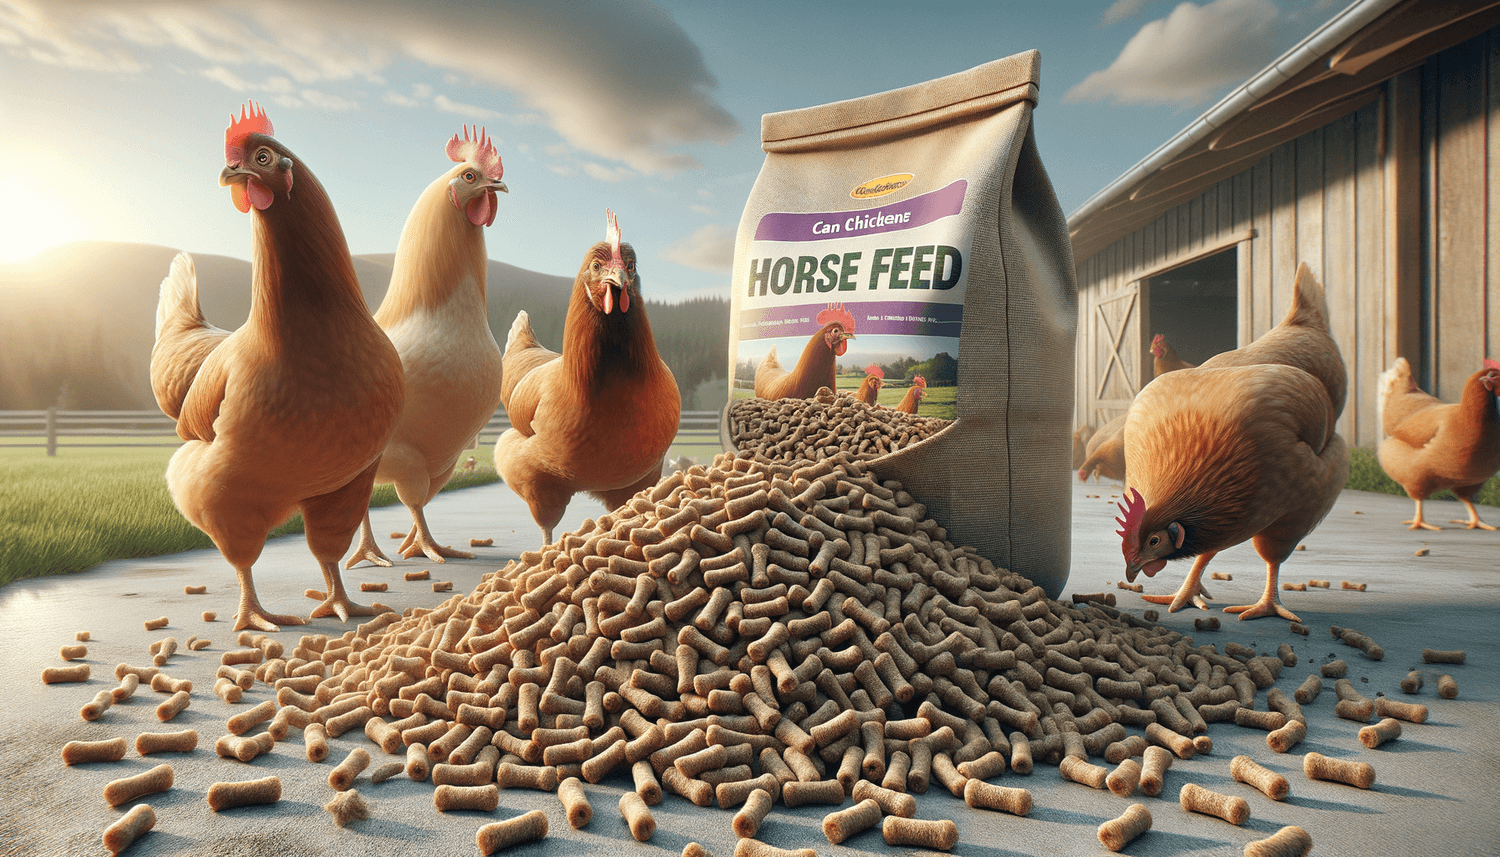 Can Chickens Eat Horse Feed?